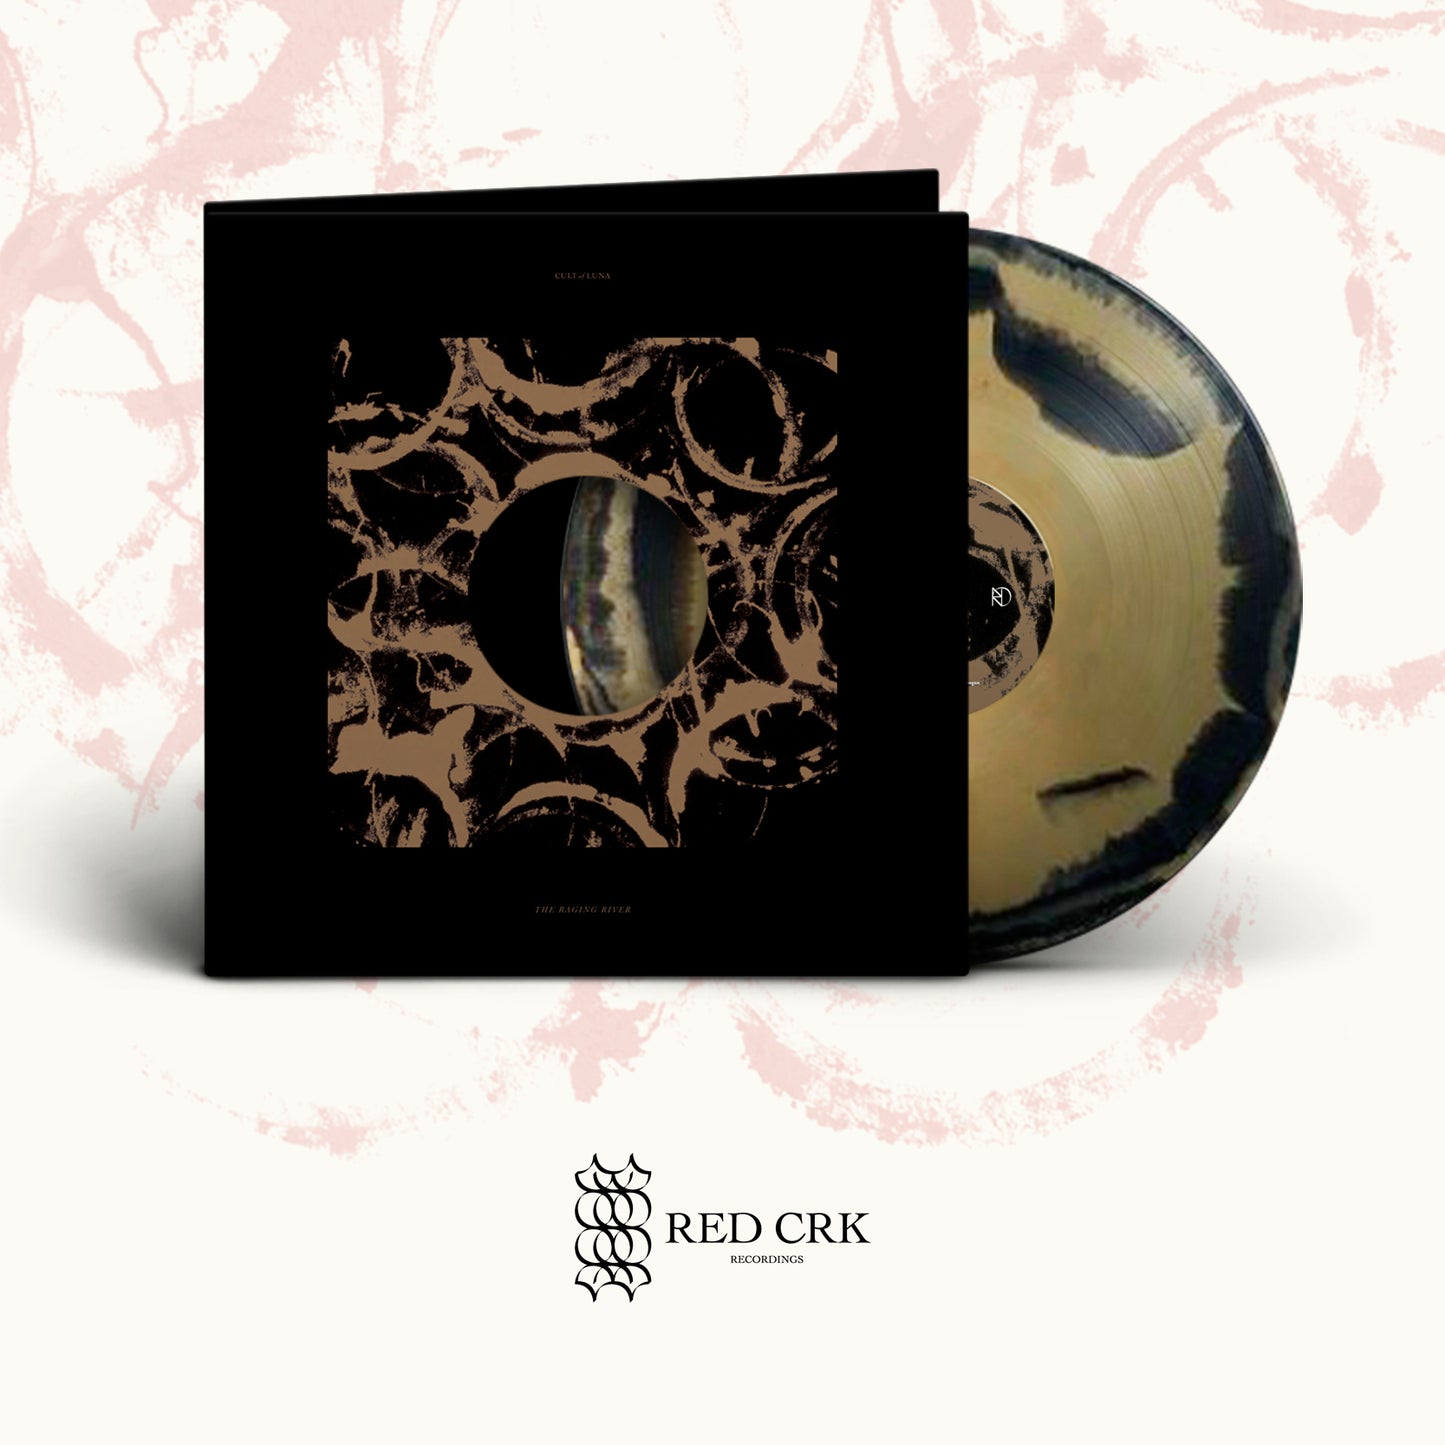 CULT OF LUNA - The Raging River LP Gtfold (ASide/Bside w/ Gold and Black) - Shop Exclusive!